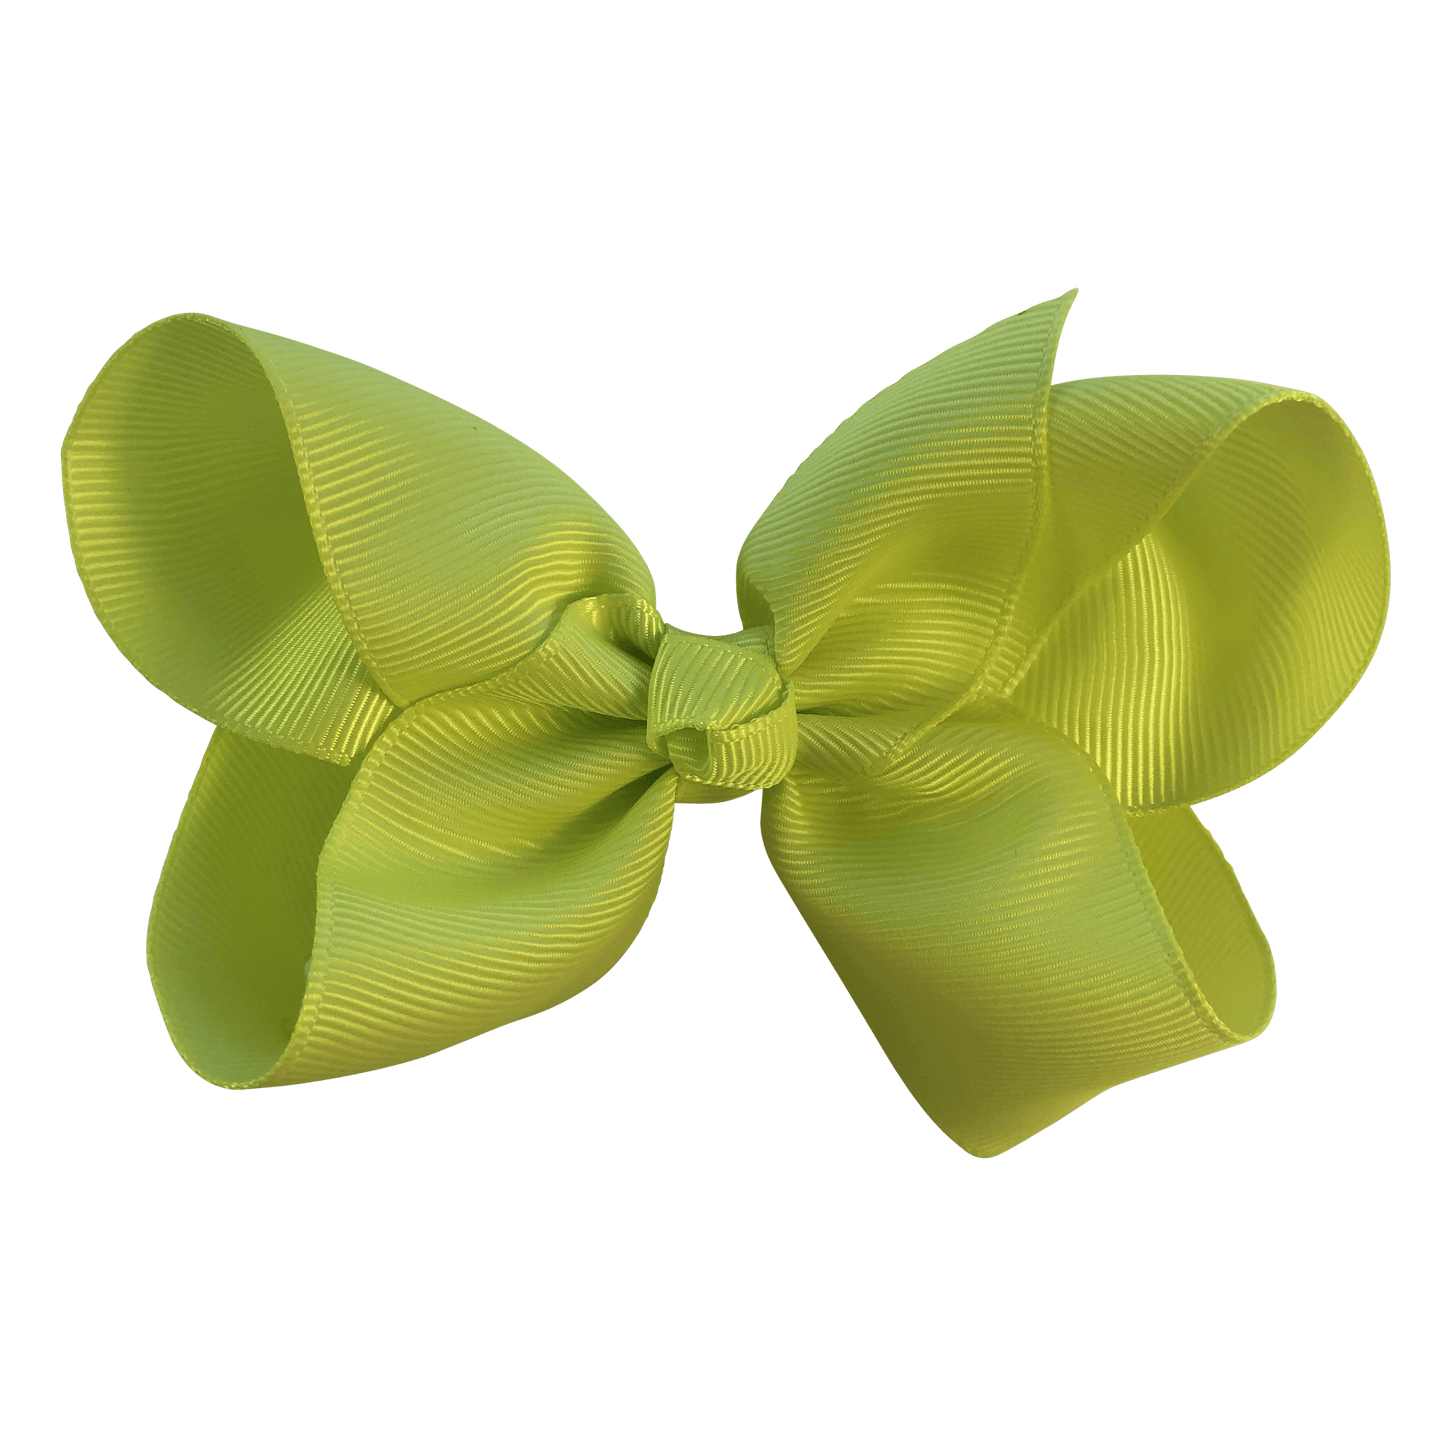 Fluoro Yellow Hair Accessories - Assorted Hair Accessories - School Uniform Hair Accessories - Ponytails and Fairytales